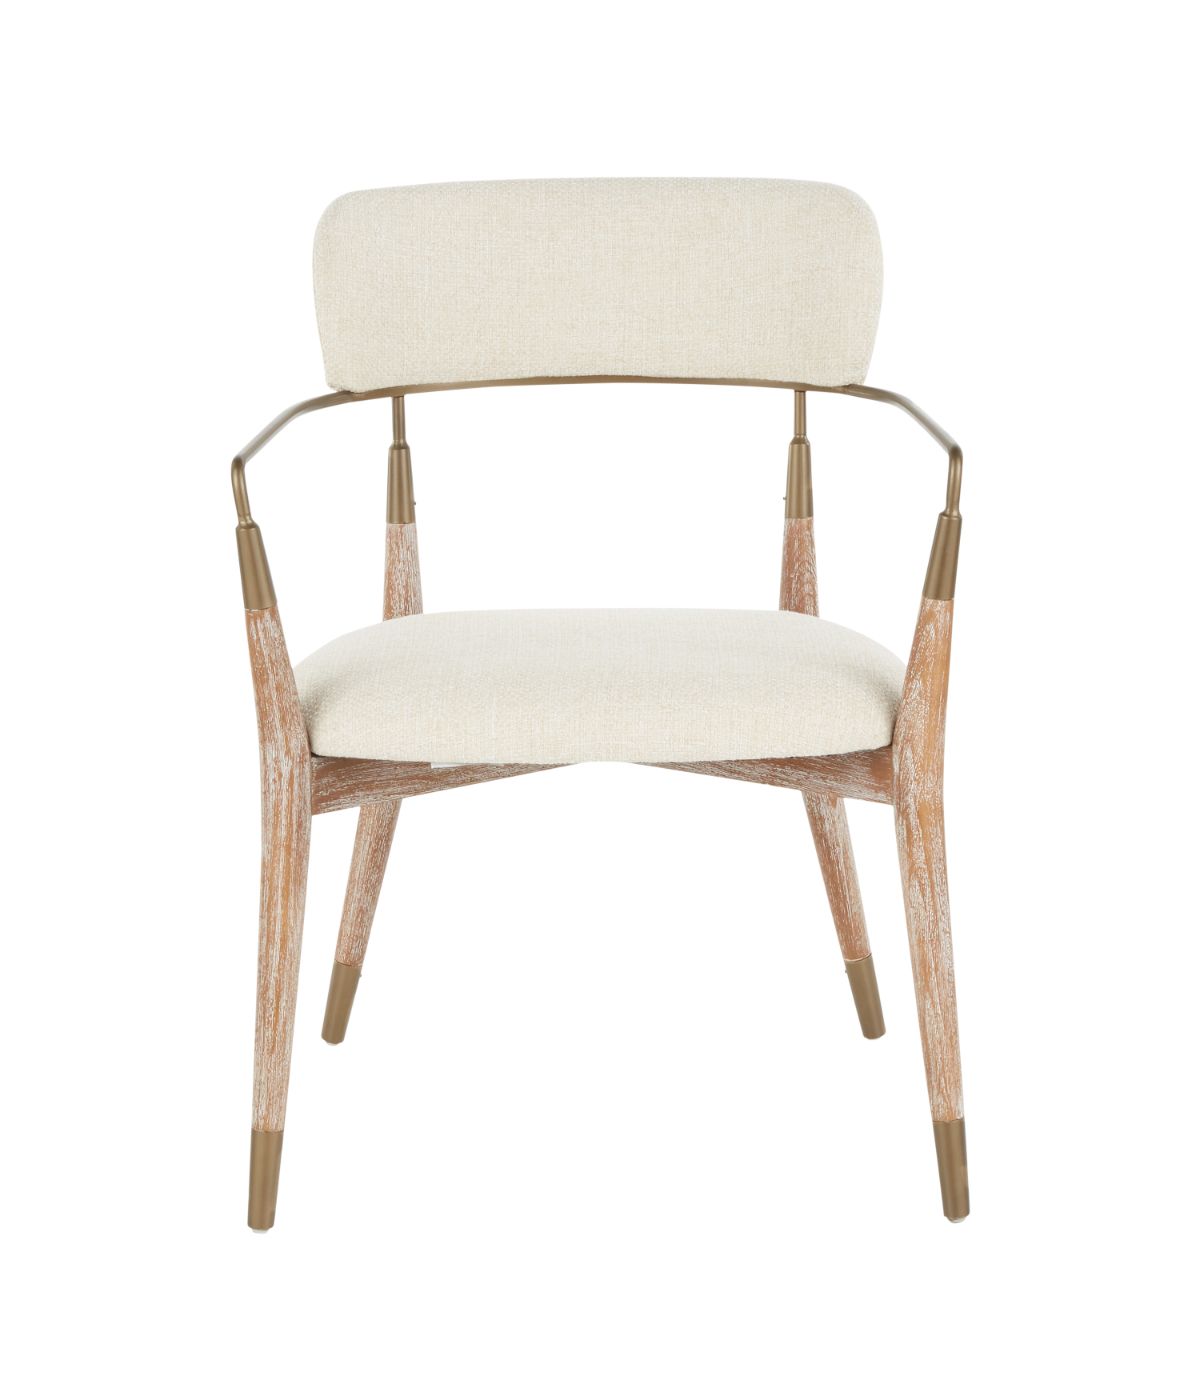 Savannah Chair - Set of 2 Copper, White Washed & Cream